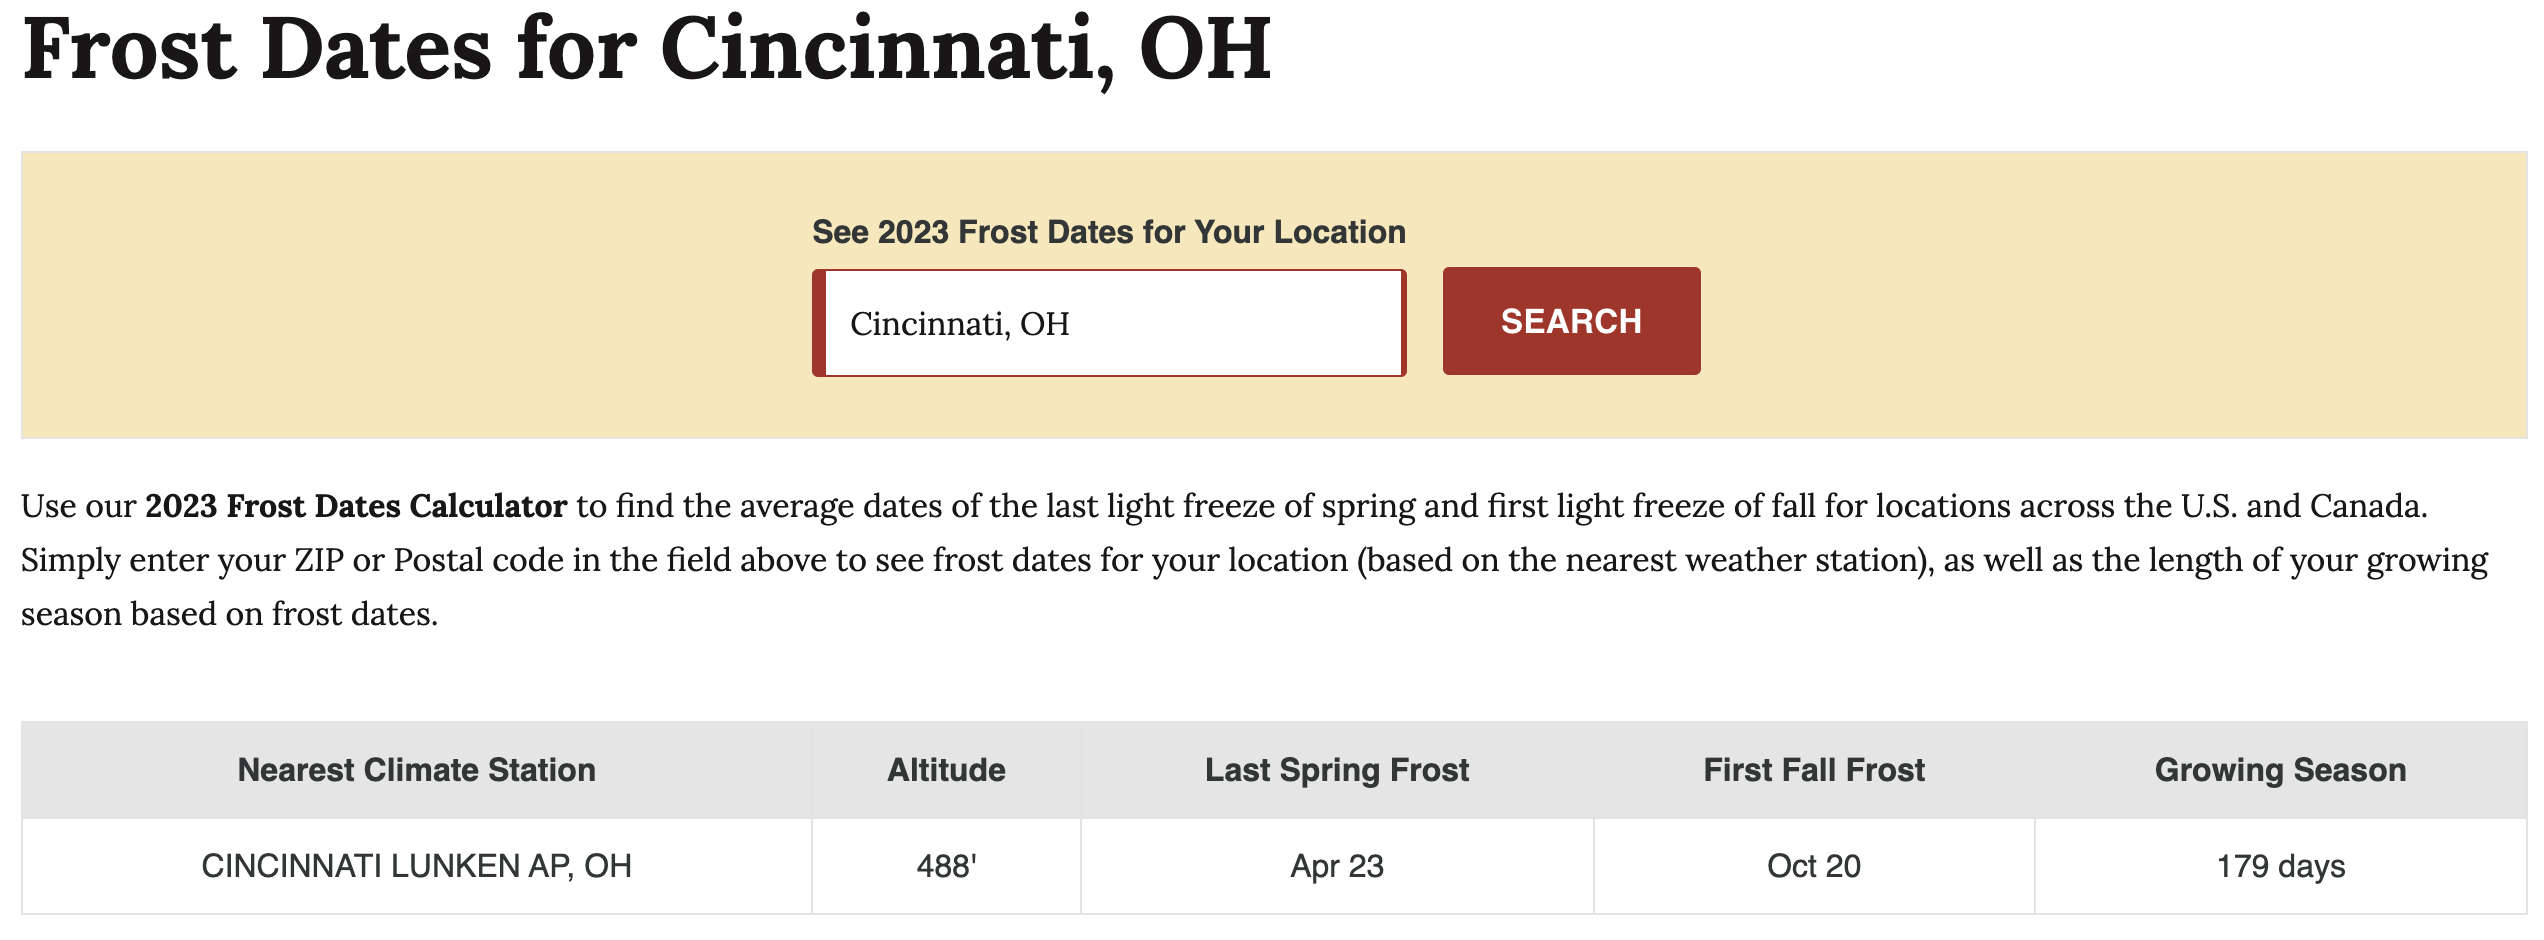 First and last frost dates for Cincinnati, OH.